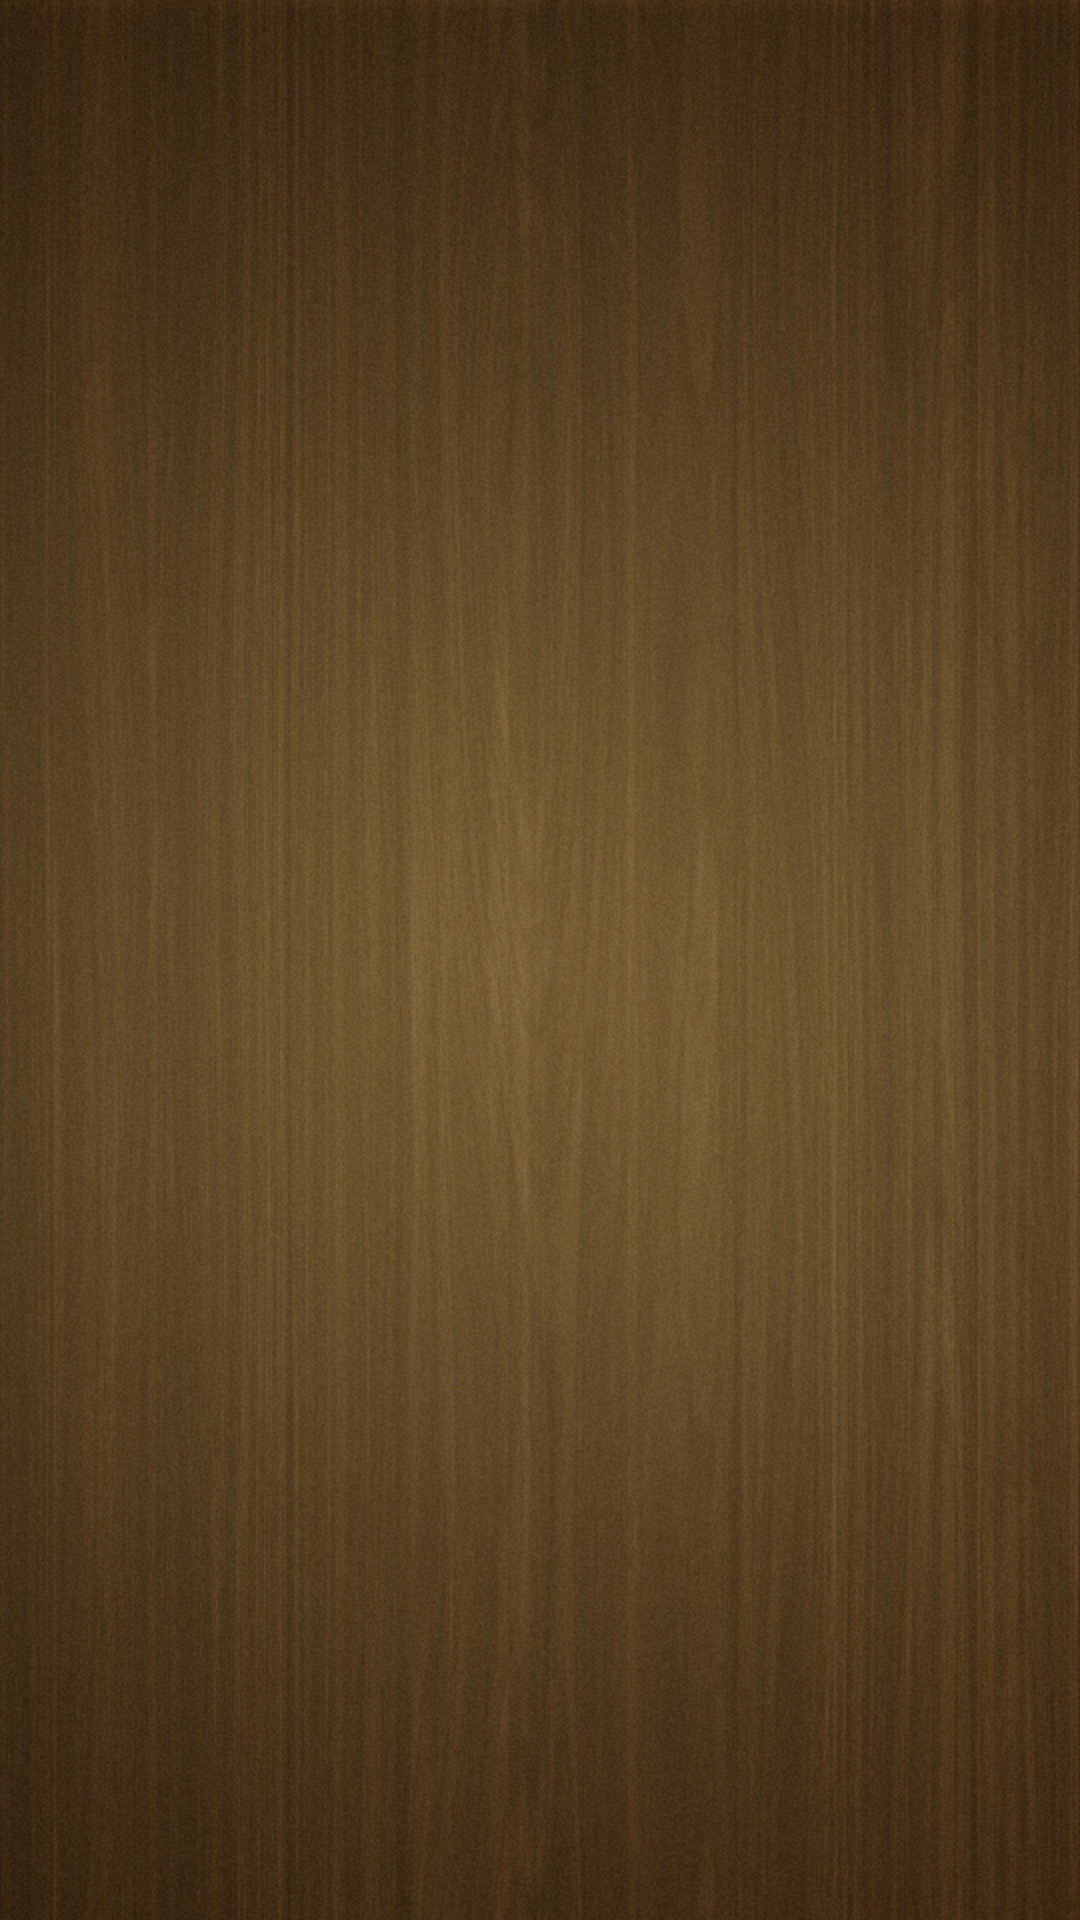 1080x1920 Dark wood Wallpapers for Galaxy S5